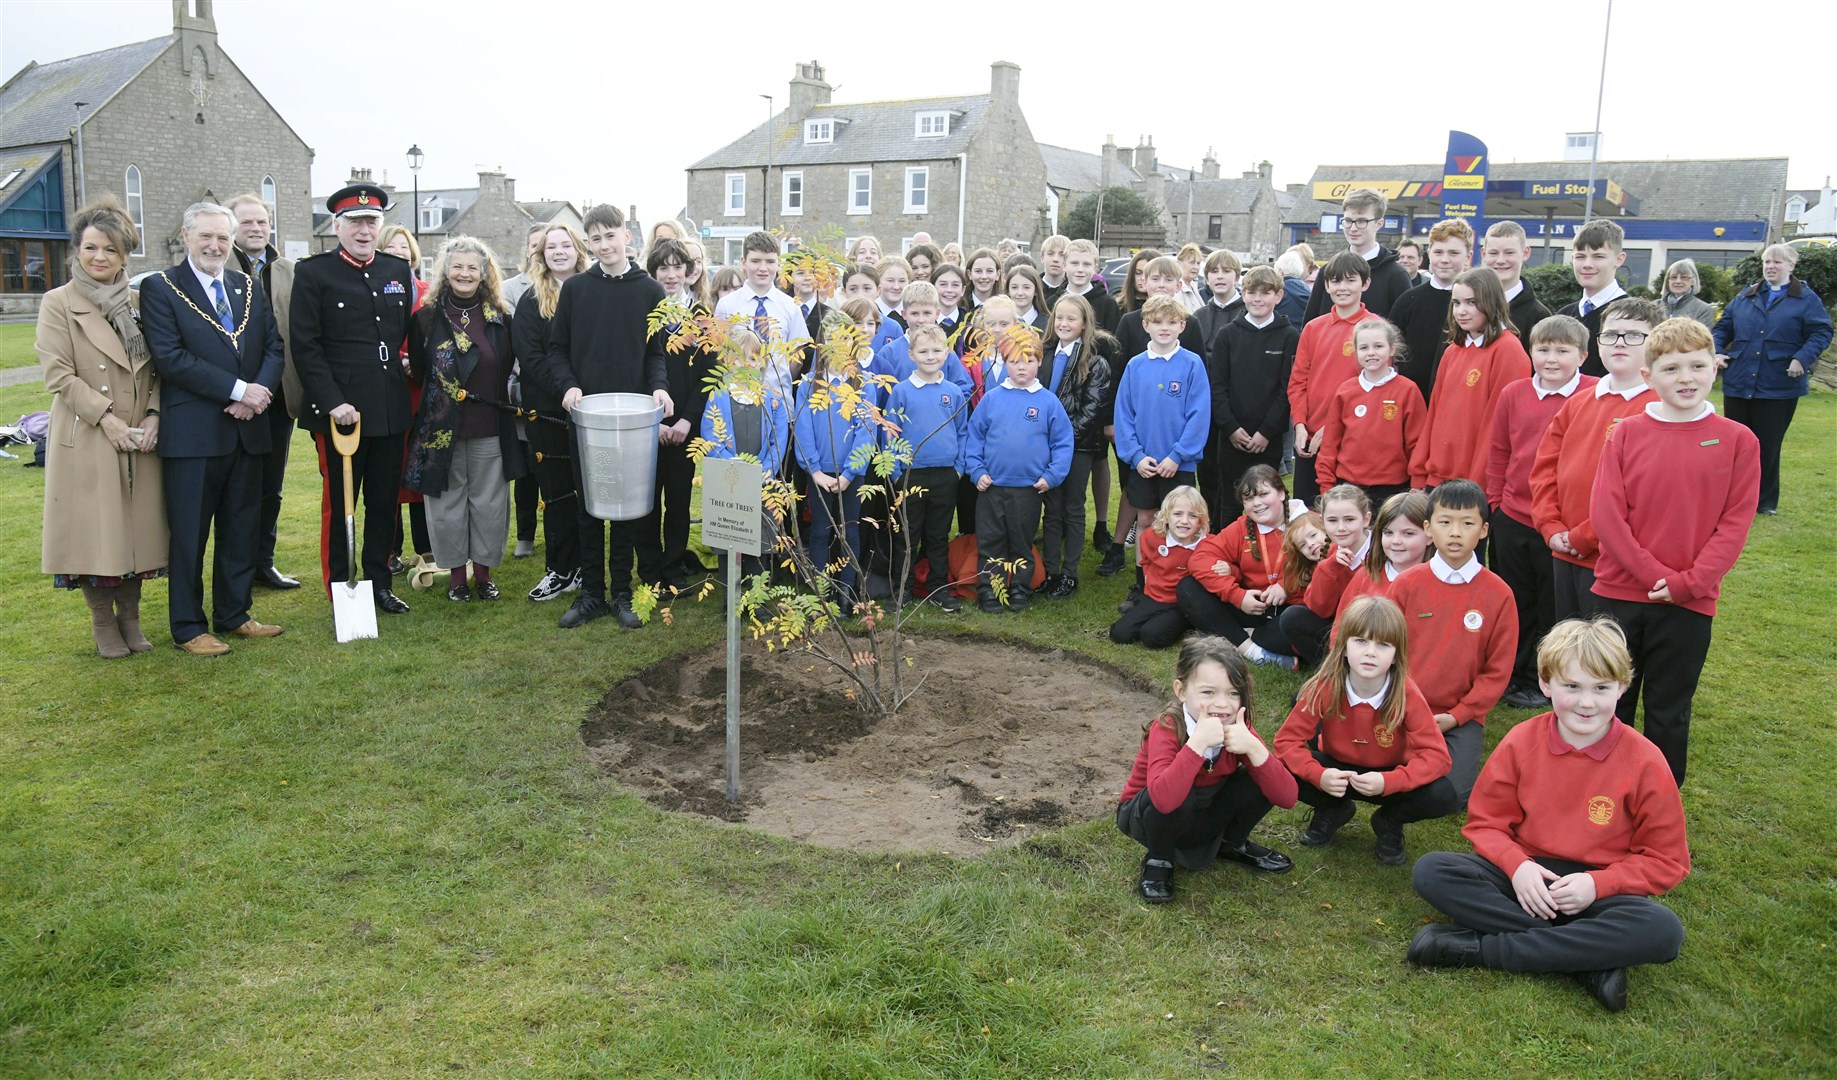 Children from St Gerardine Primary School, Hythehill Primary School and Lossiemouth High School also gathered to watch the "Tree of Trees" being planted. Picture: Beth Taylor